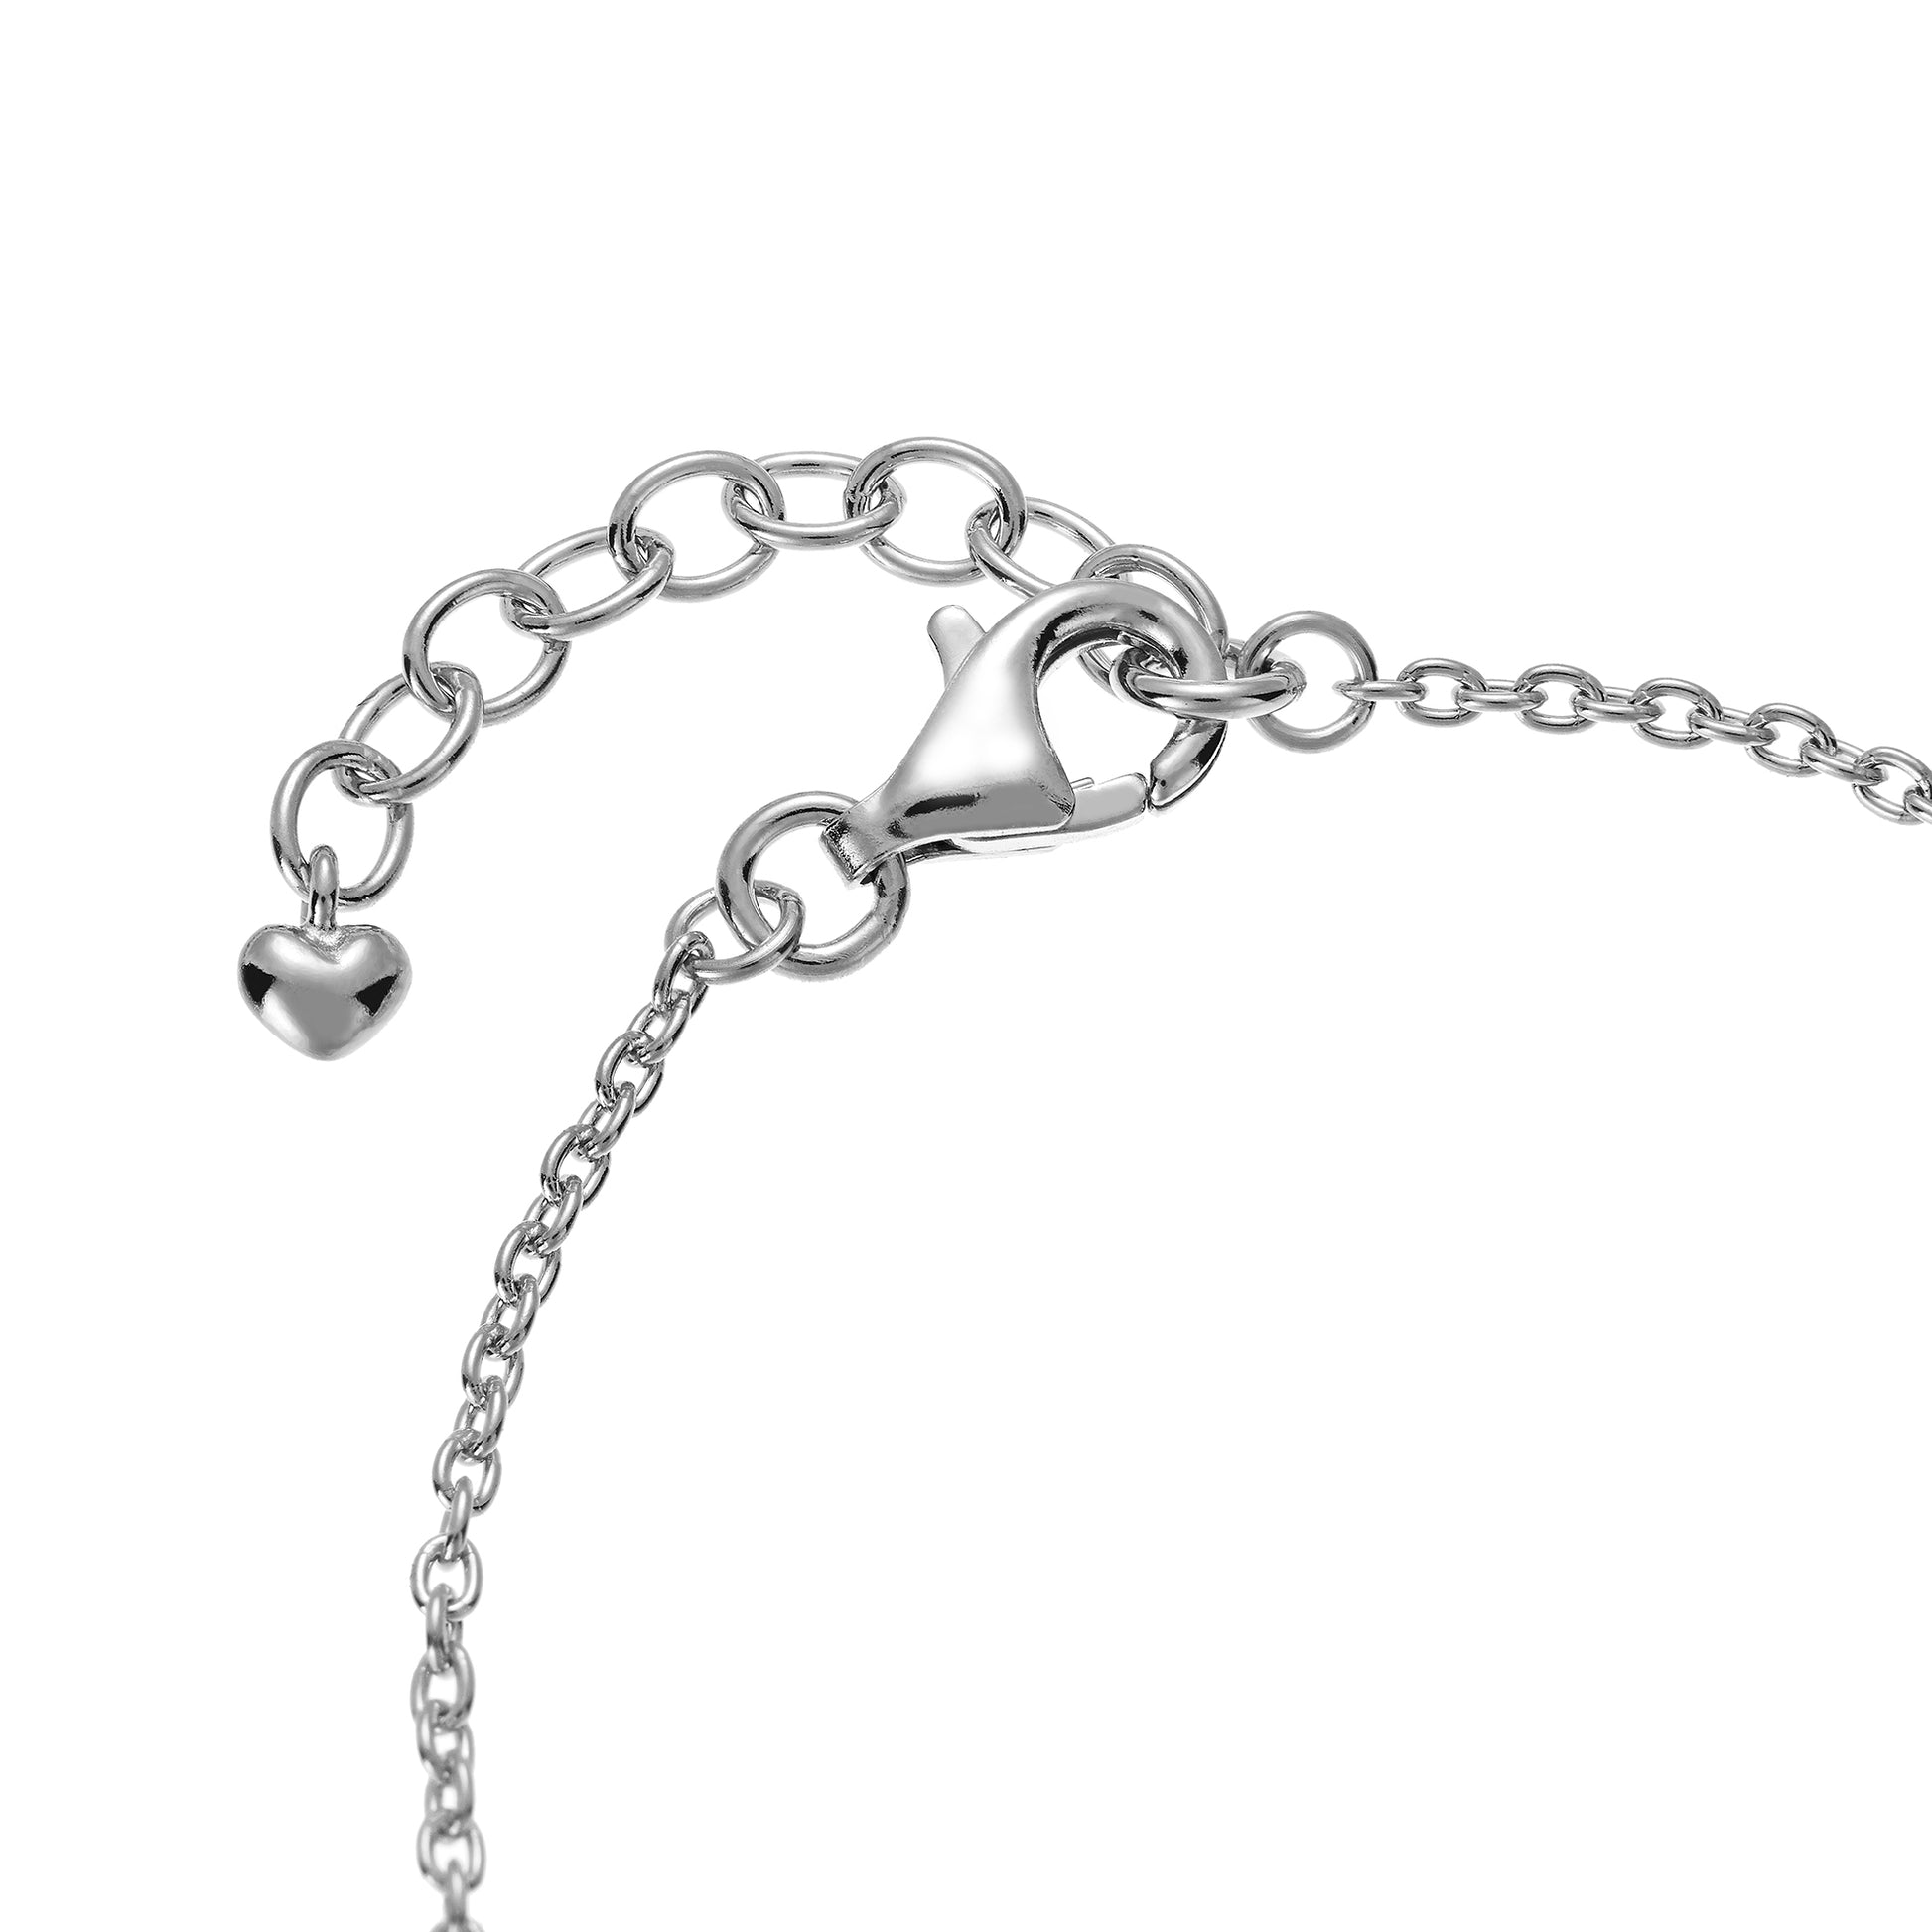 Children’s Sterling Silver Extendable Bracelet with clasp closure and heart  charm